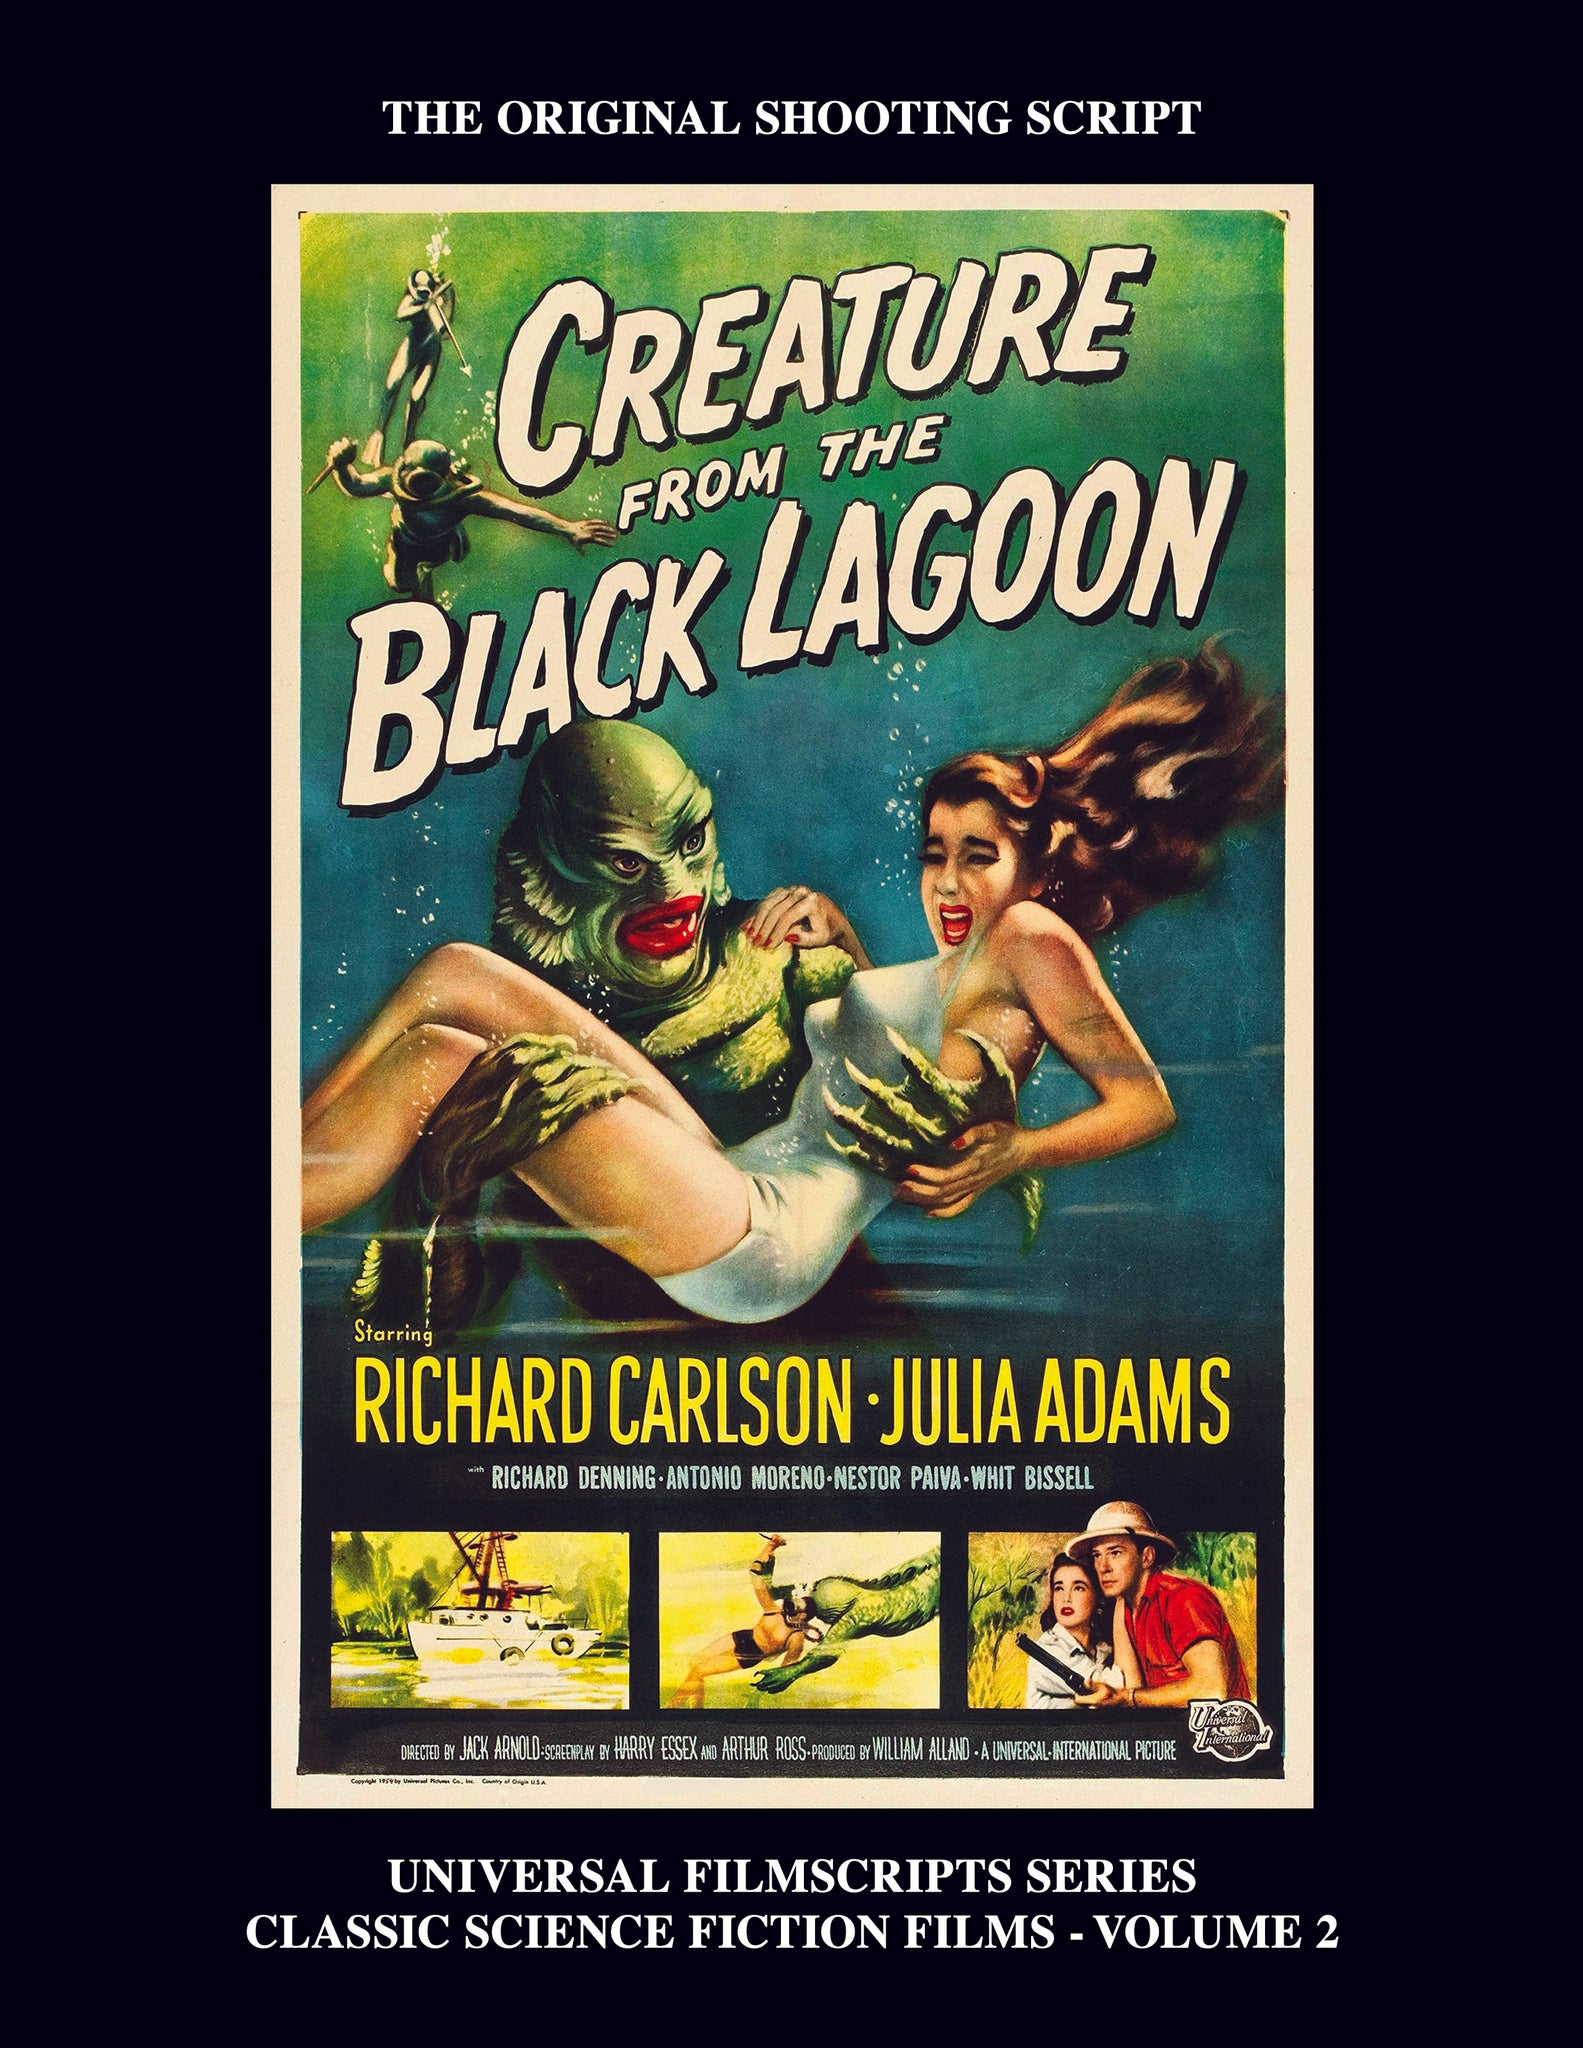 Creature from the Black Lagoon (Universal Filmscripts Series Classic Science Fiction) (paperback)